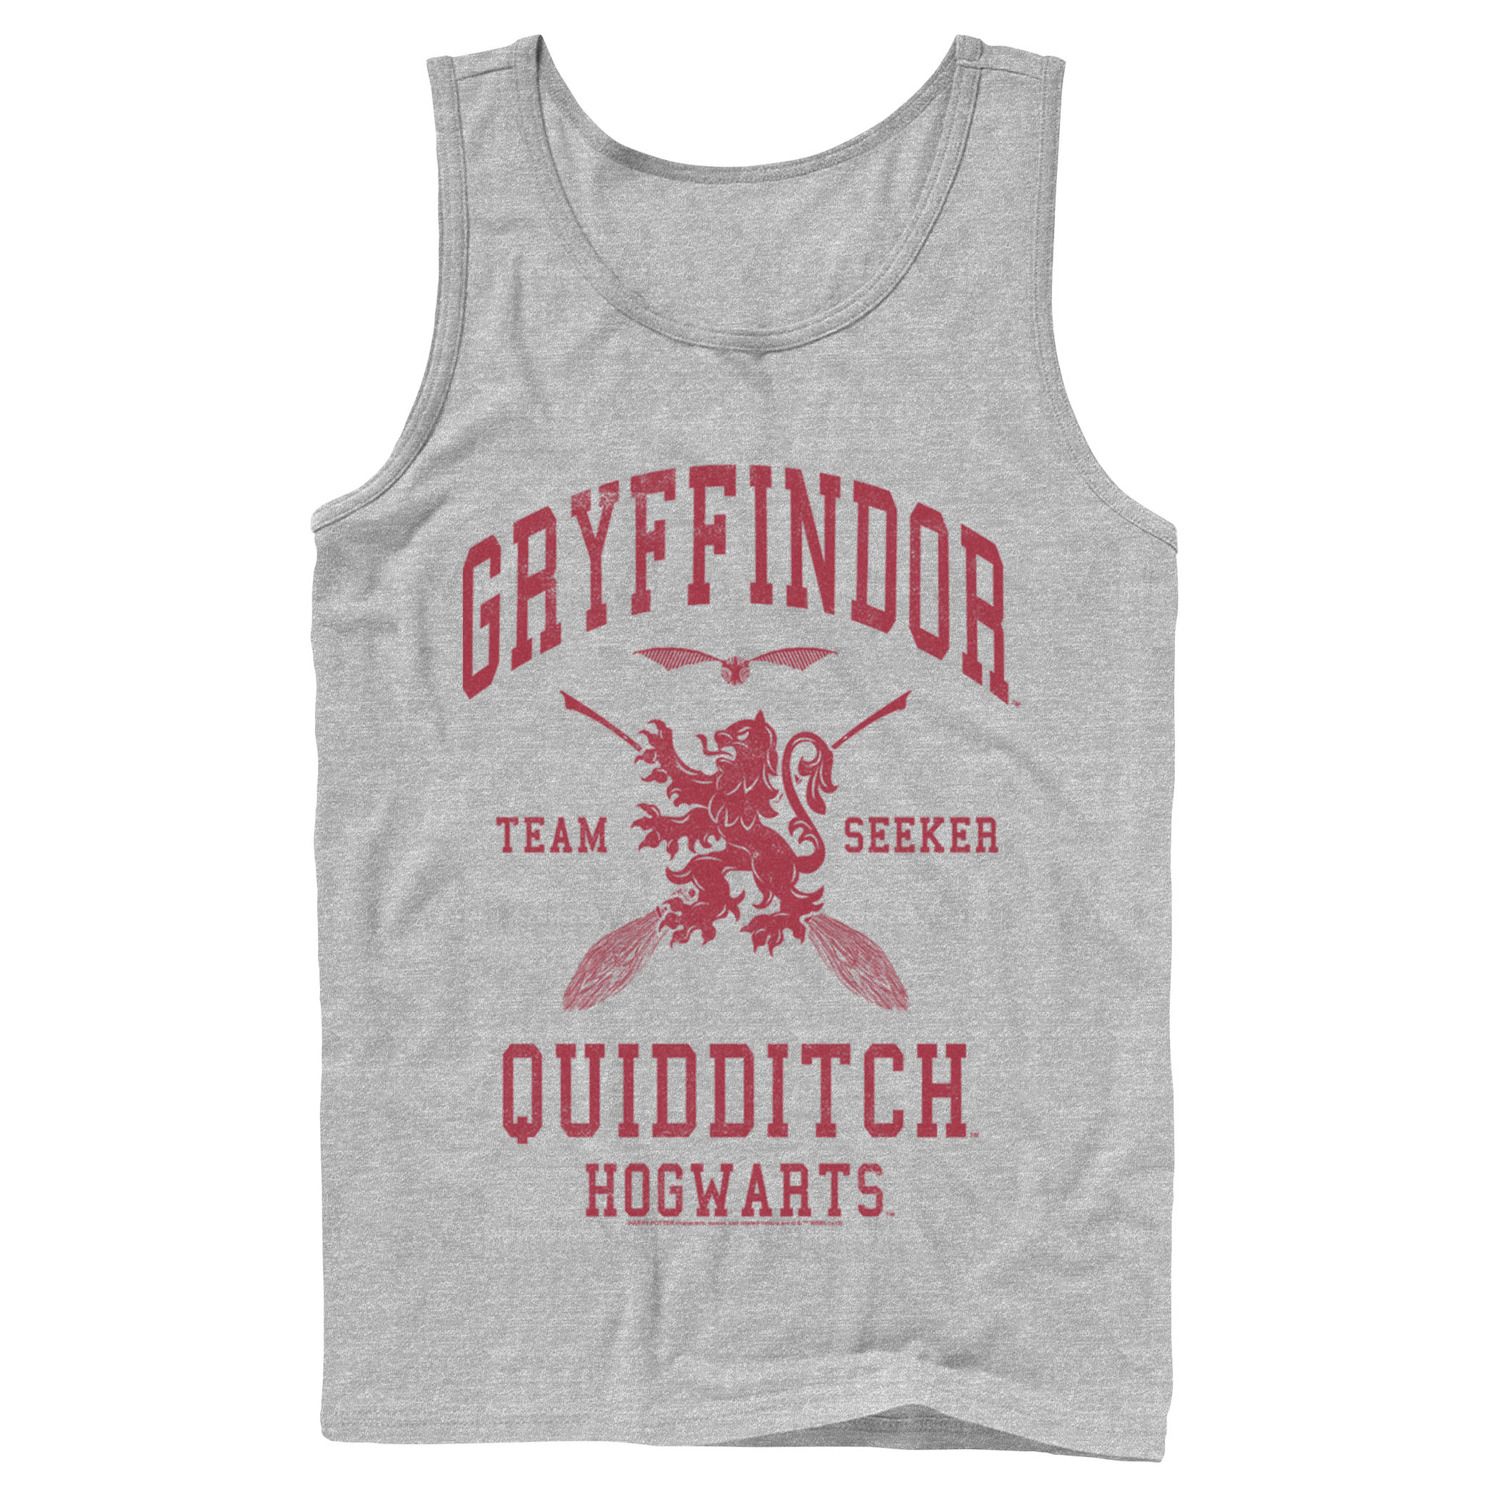 Image for Harry Potter Men's Deathly Hallows 2 Gryffindor Quidditch Tank Top at Kohl's.